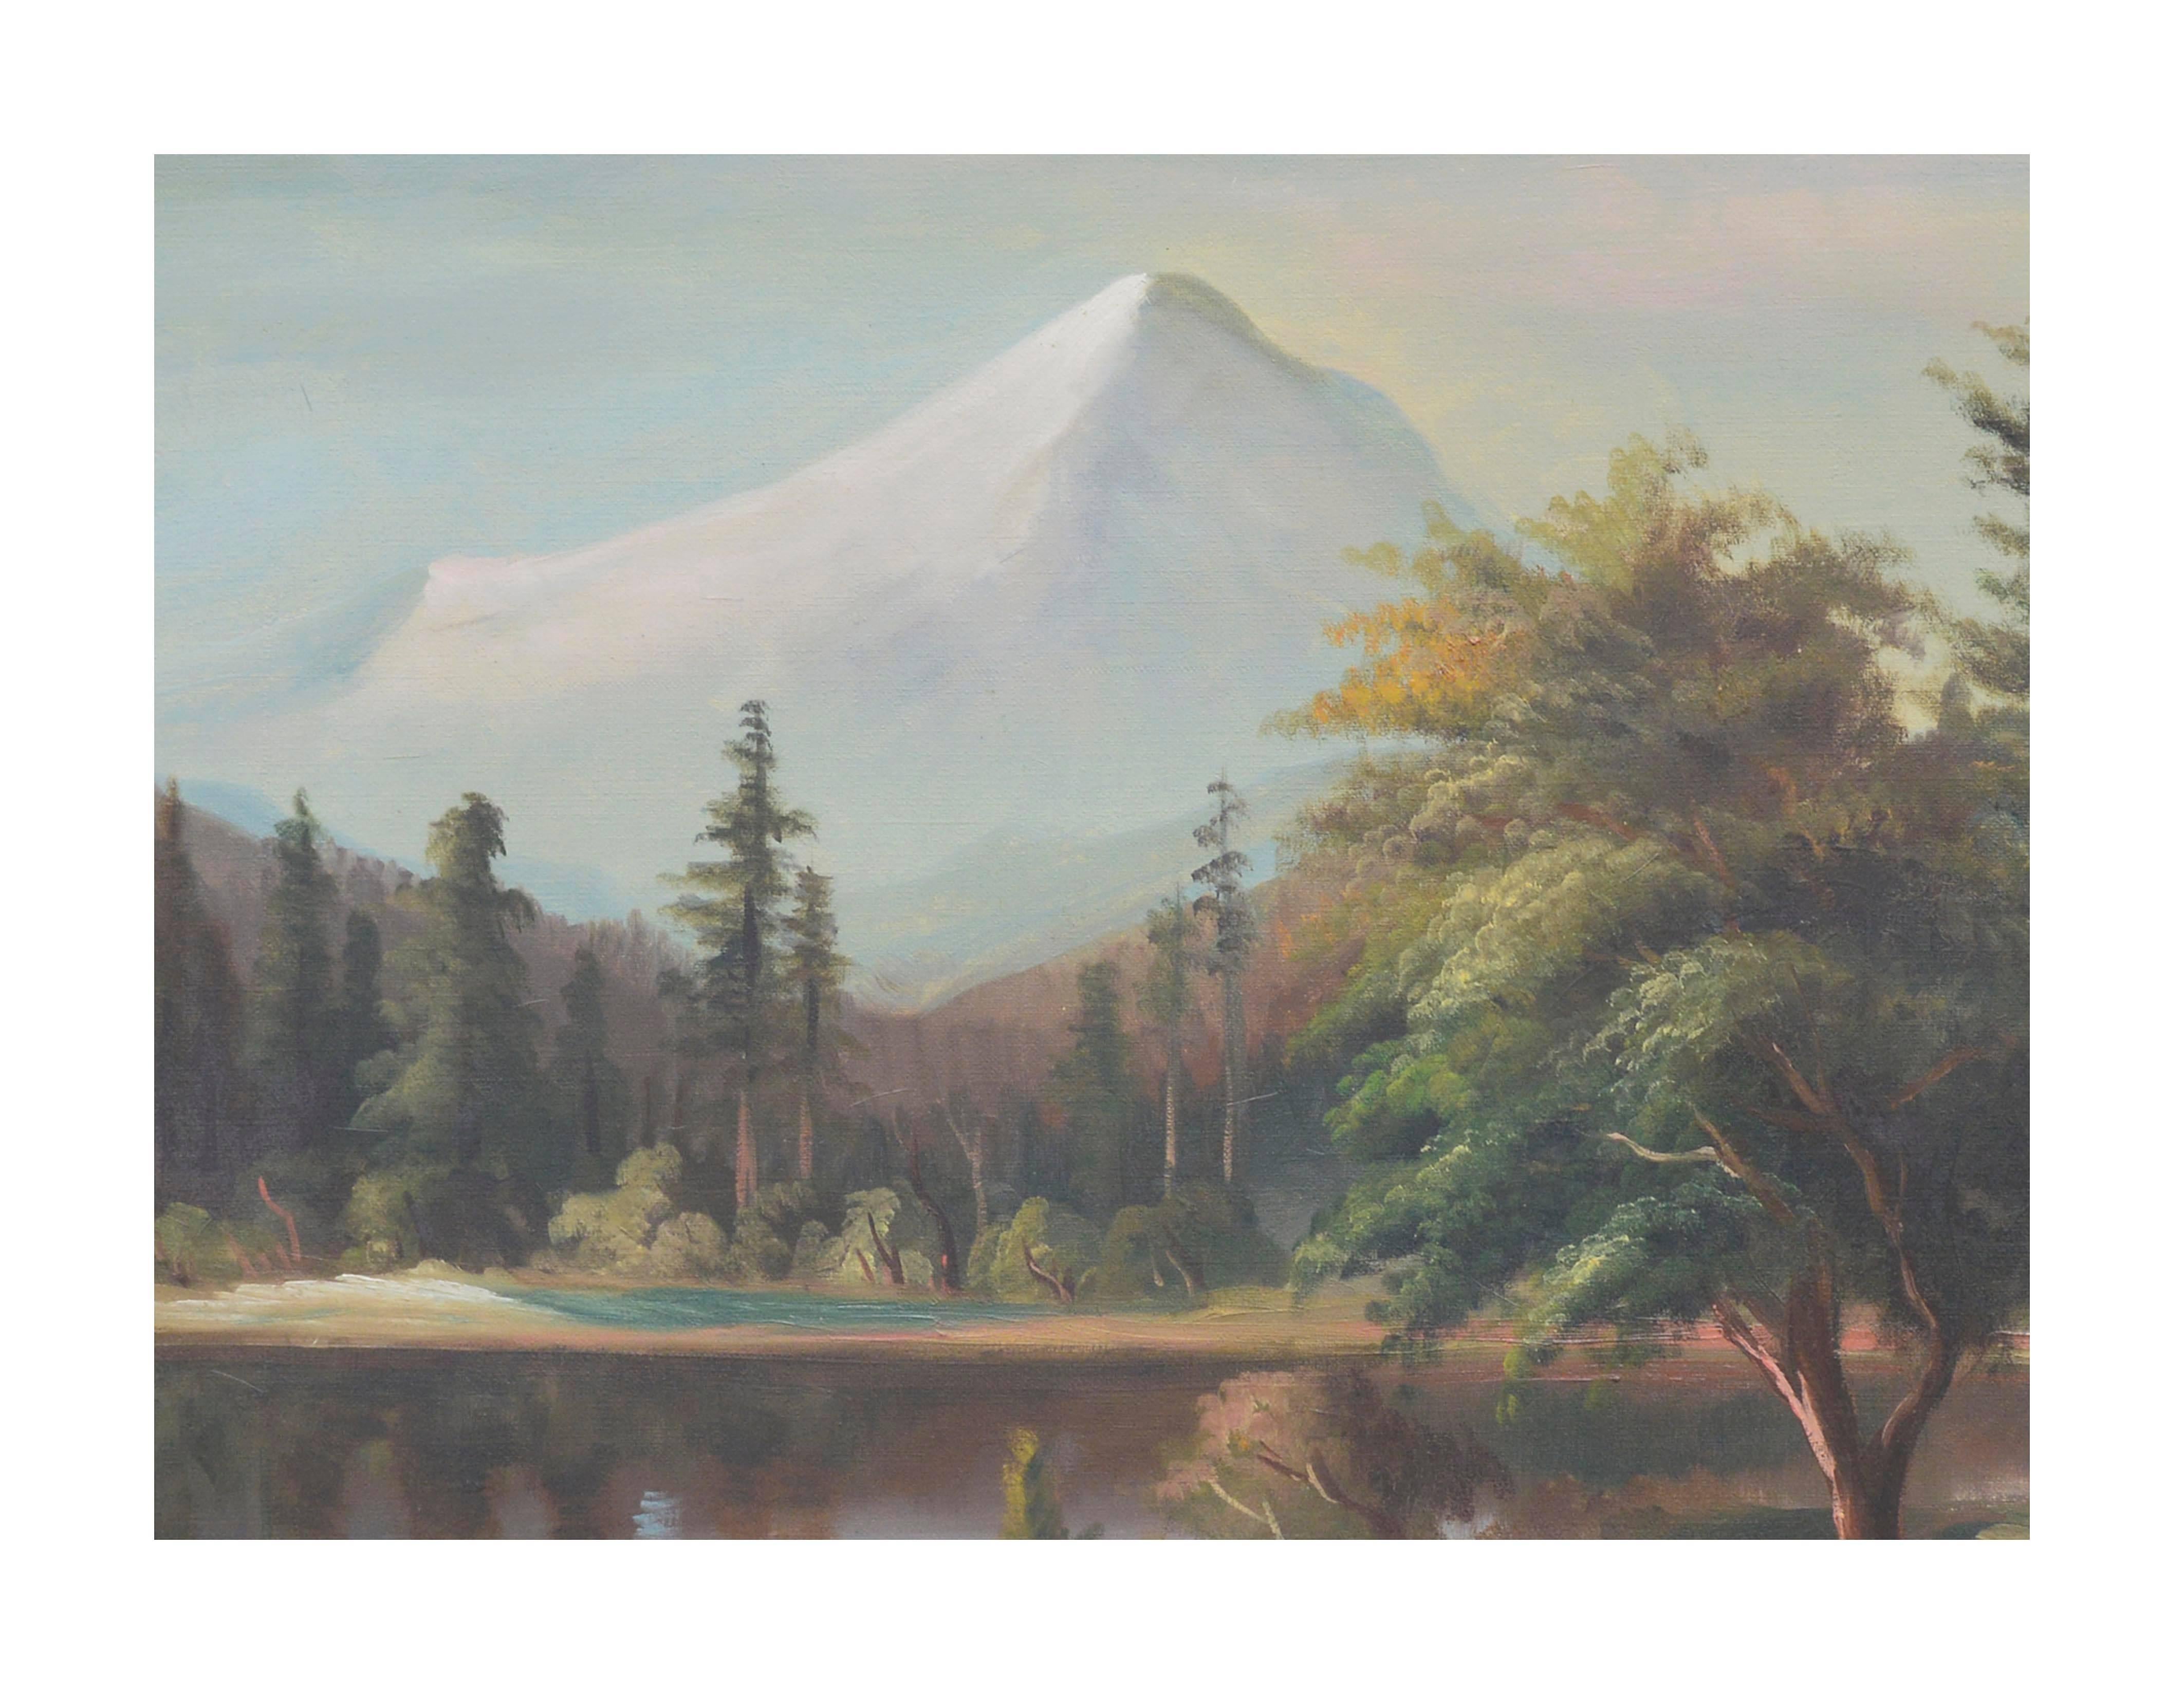 Mount Hood From Clear Lake, Early 20th Century Large-Scale Panoramic Landscape  - Painting by William Lemos